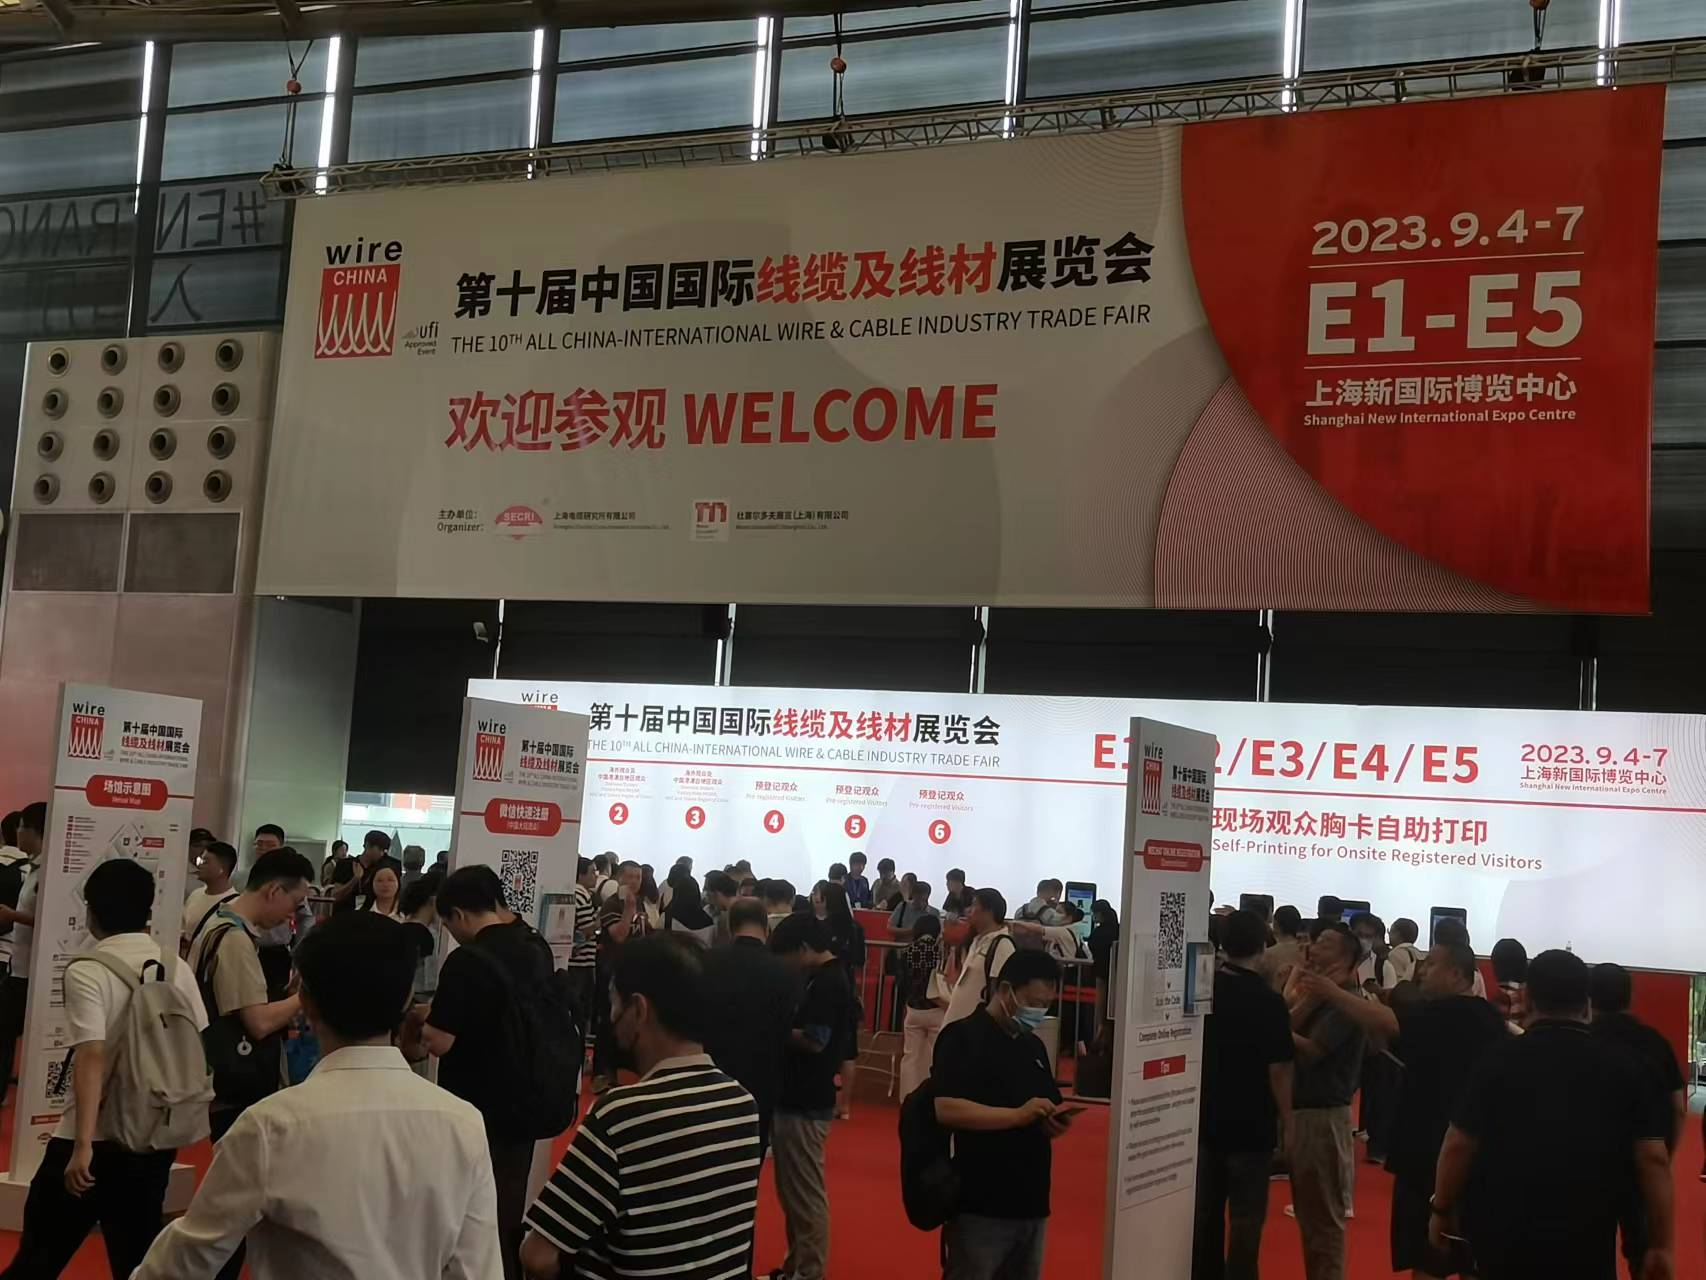 Wire China 2023: The 10th China International Cable and Wire Trade Fair